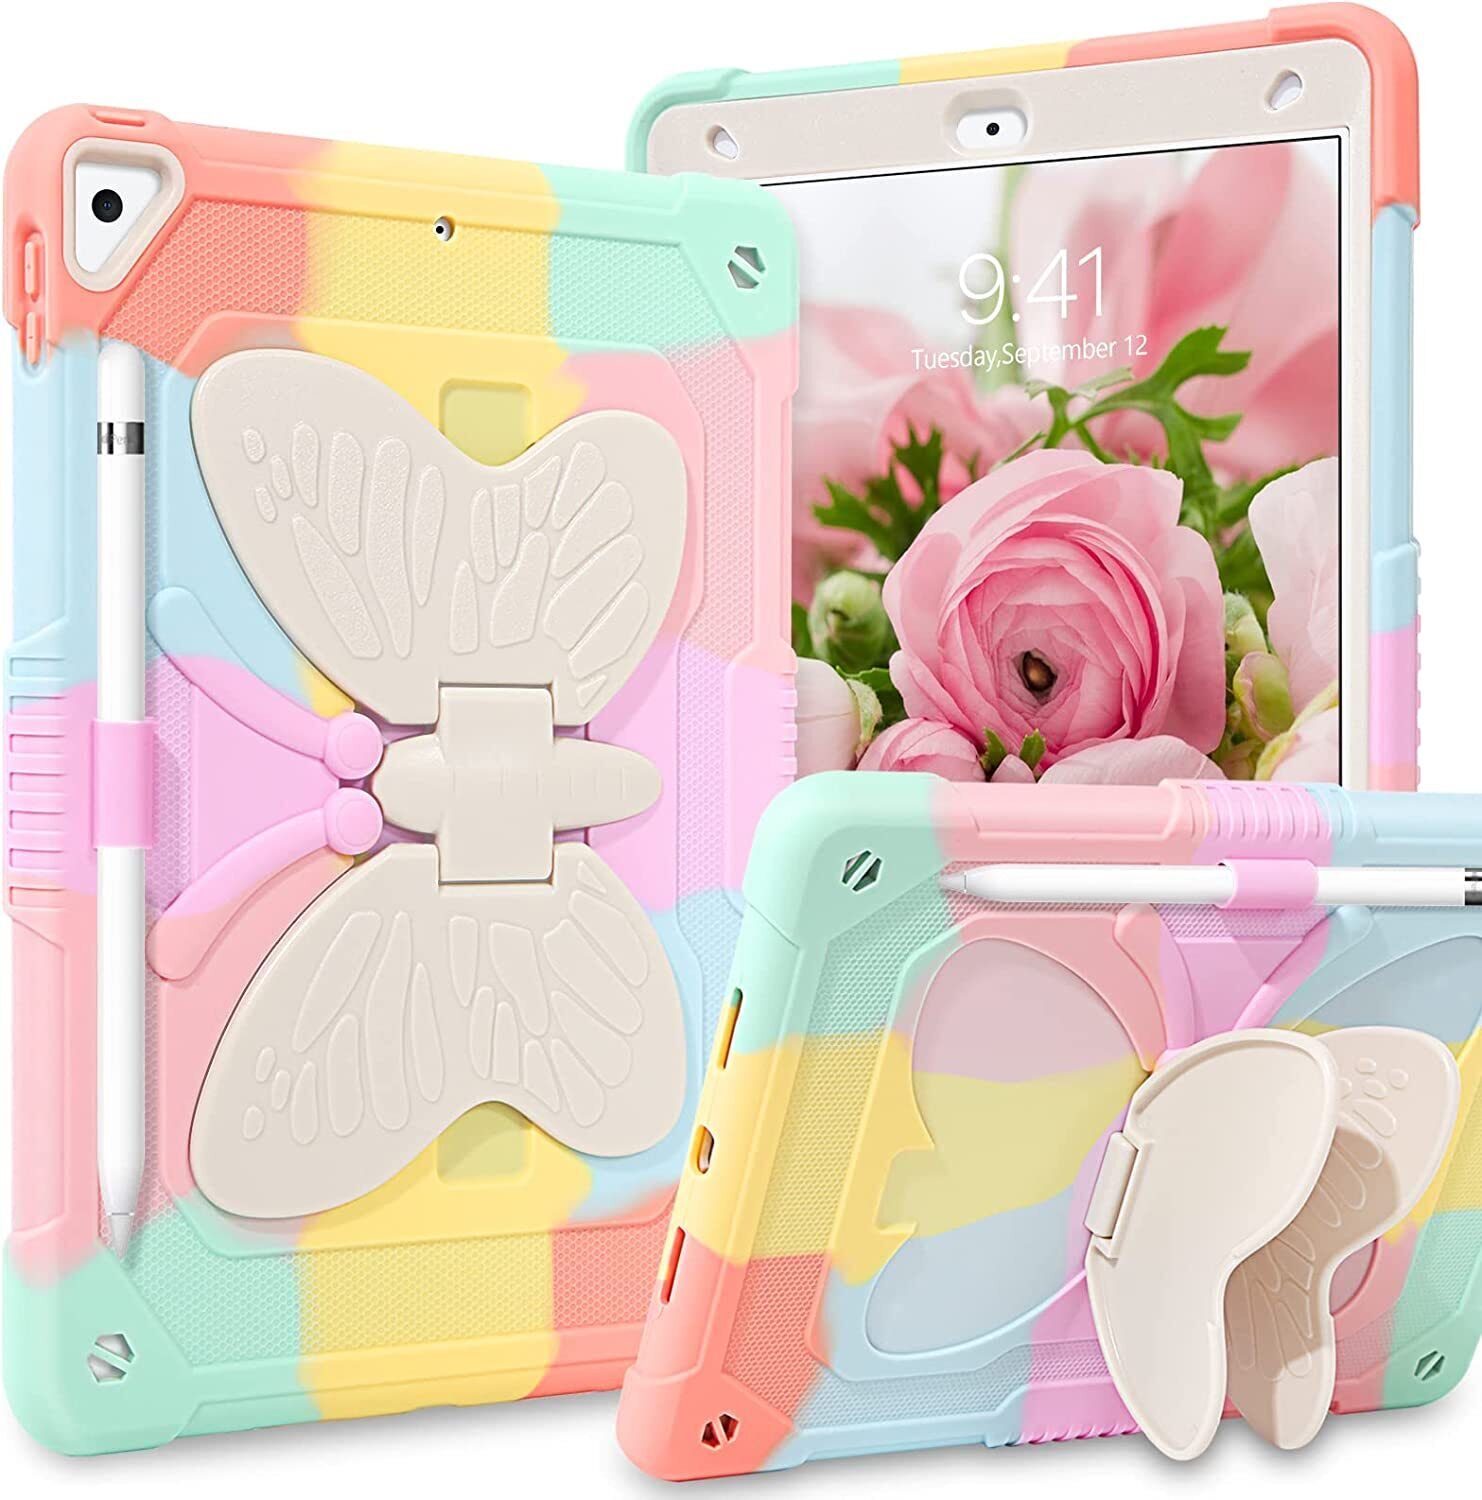 For iPad 5/6/7/8/9th/Pro/Air 2 Shockproof Kids Safety Hard Stand Case Cover